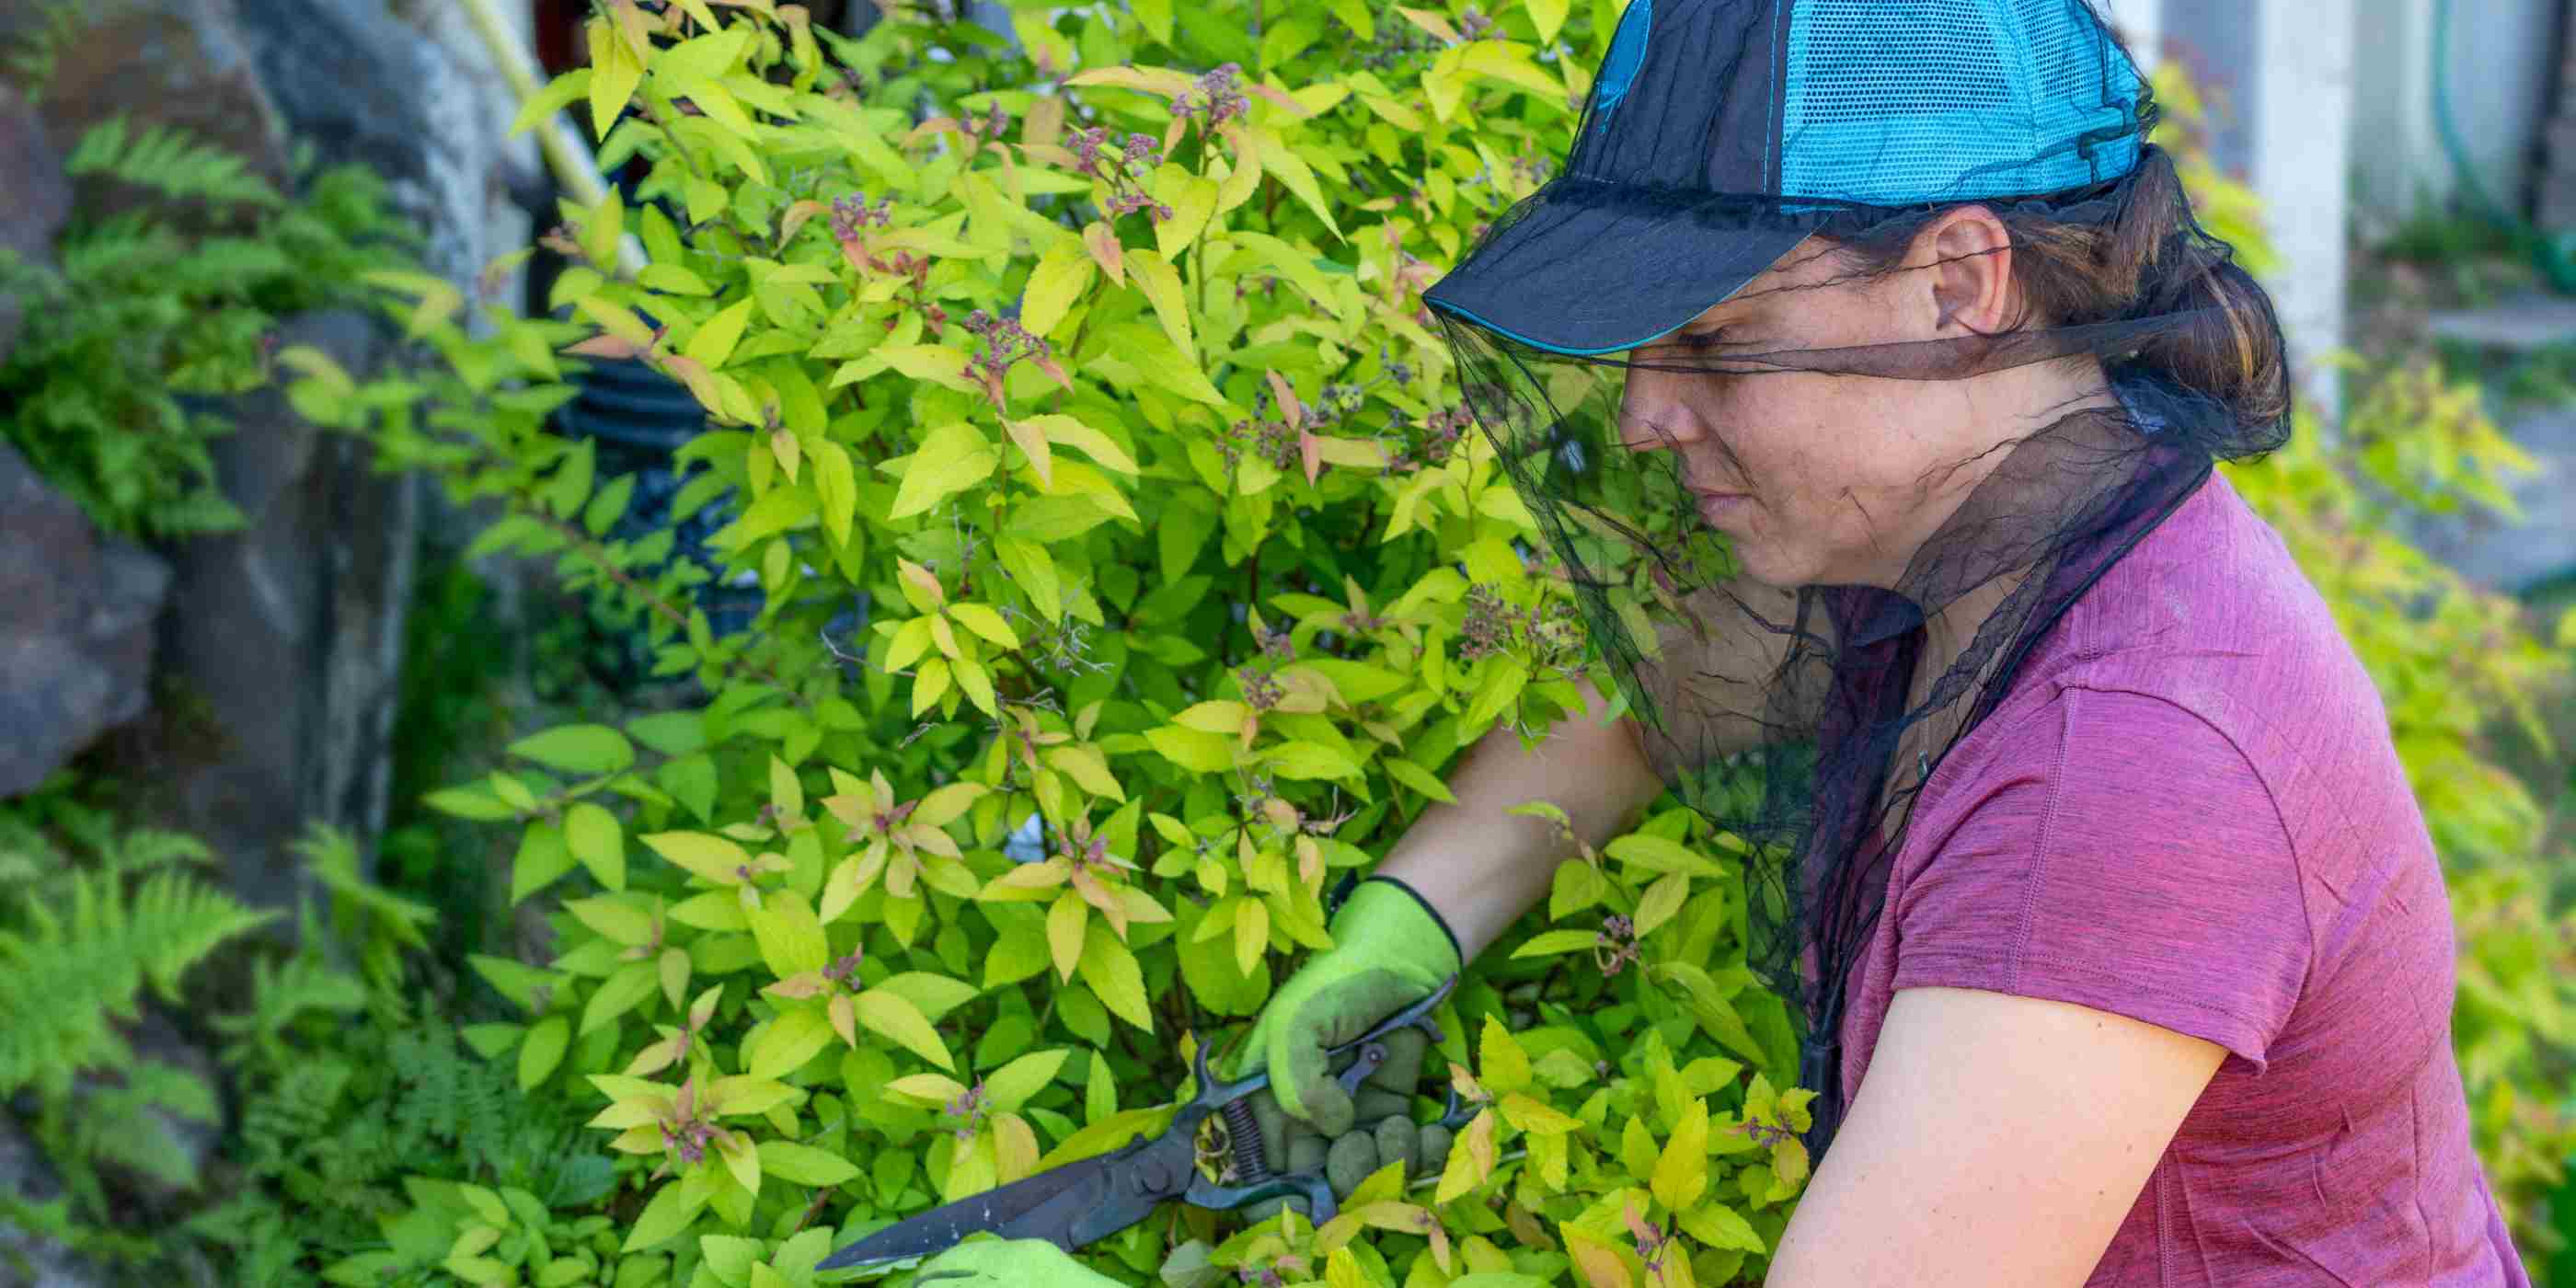 Woman in pink shirt and blue hat wearing Ben's Invisinet with Insect Shield head net while clipping bushes